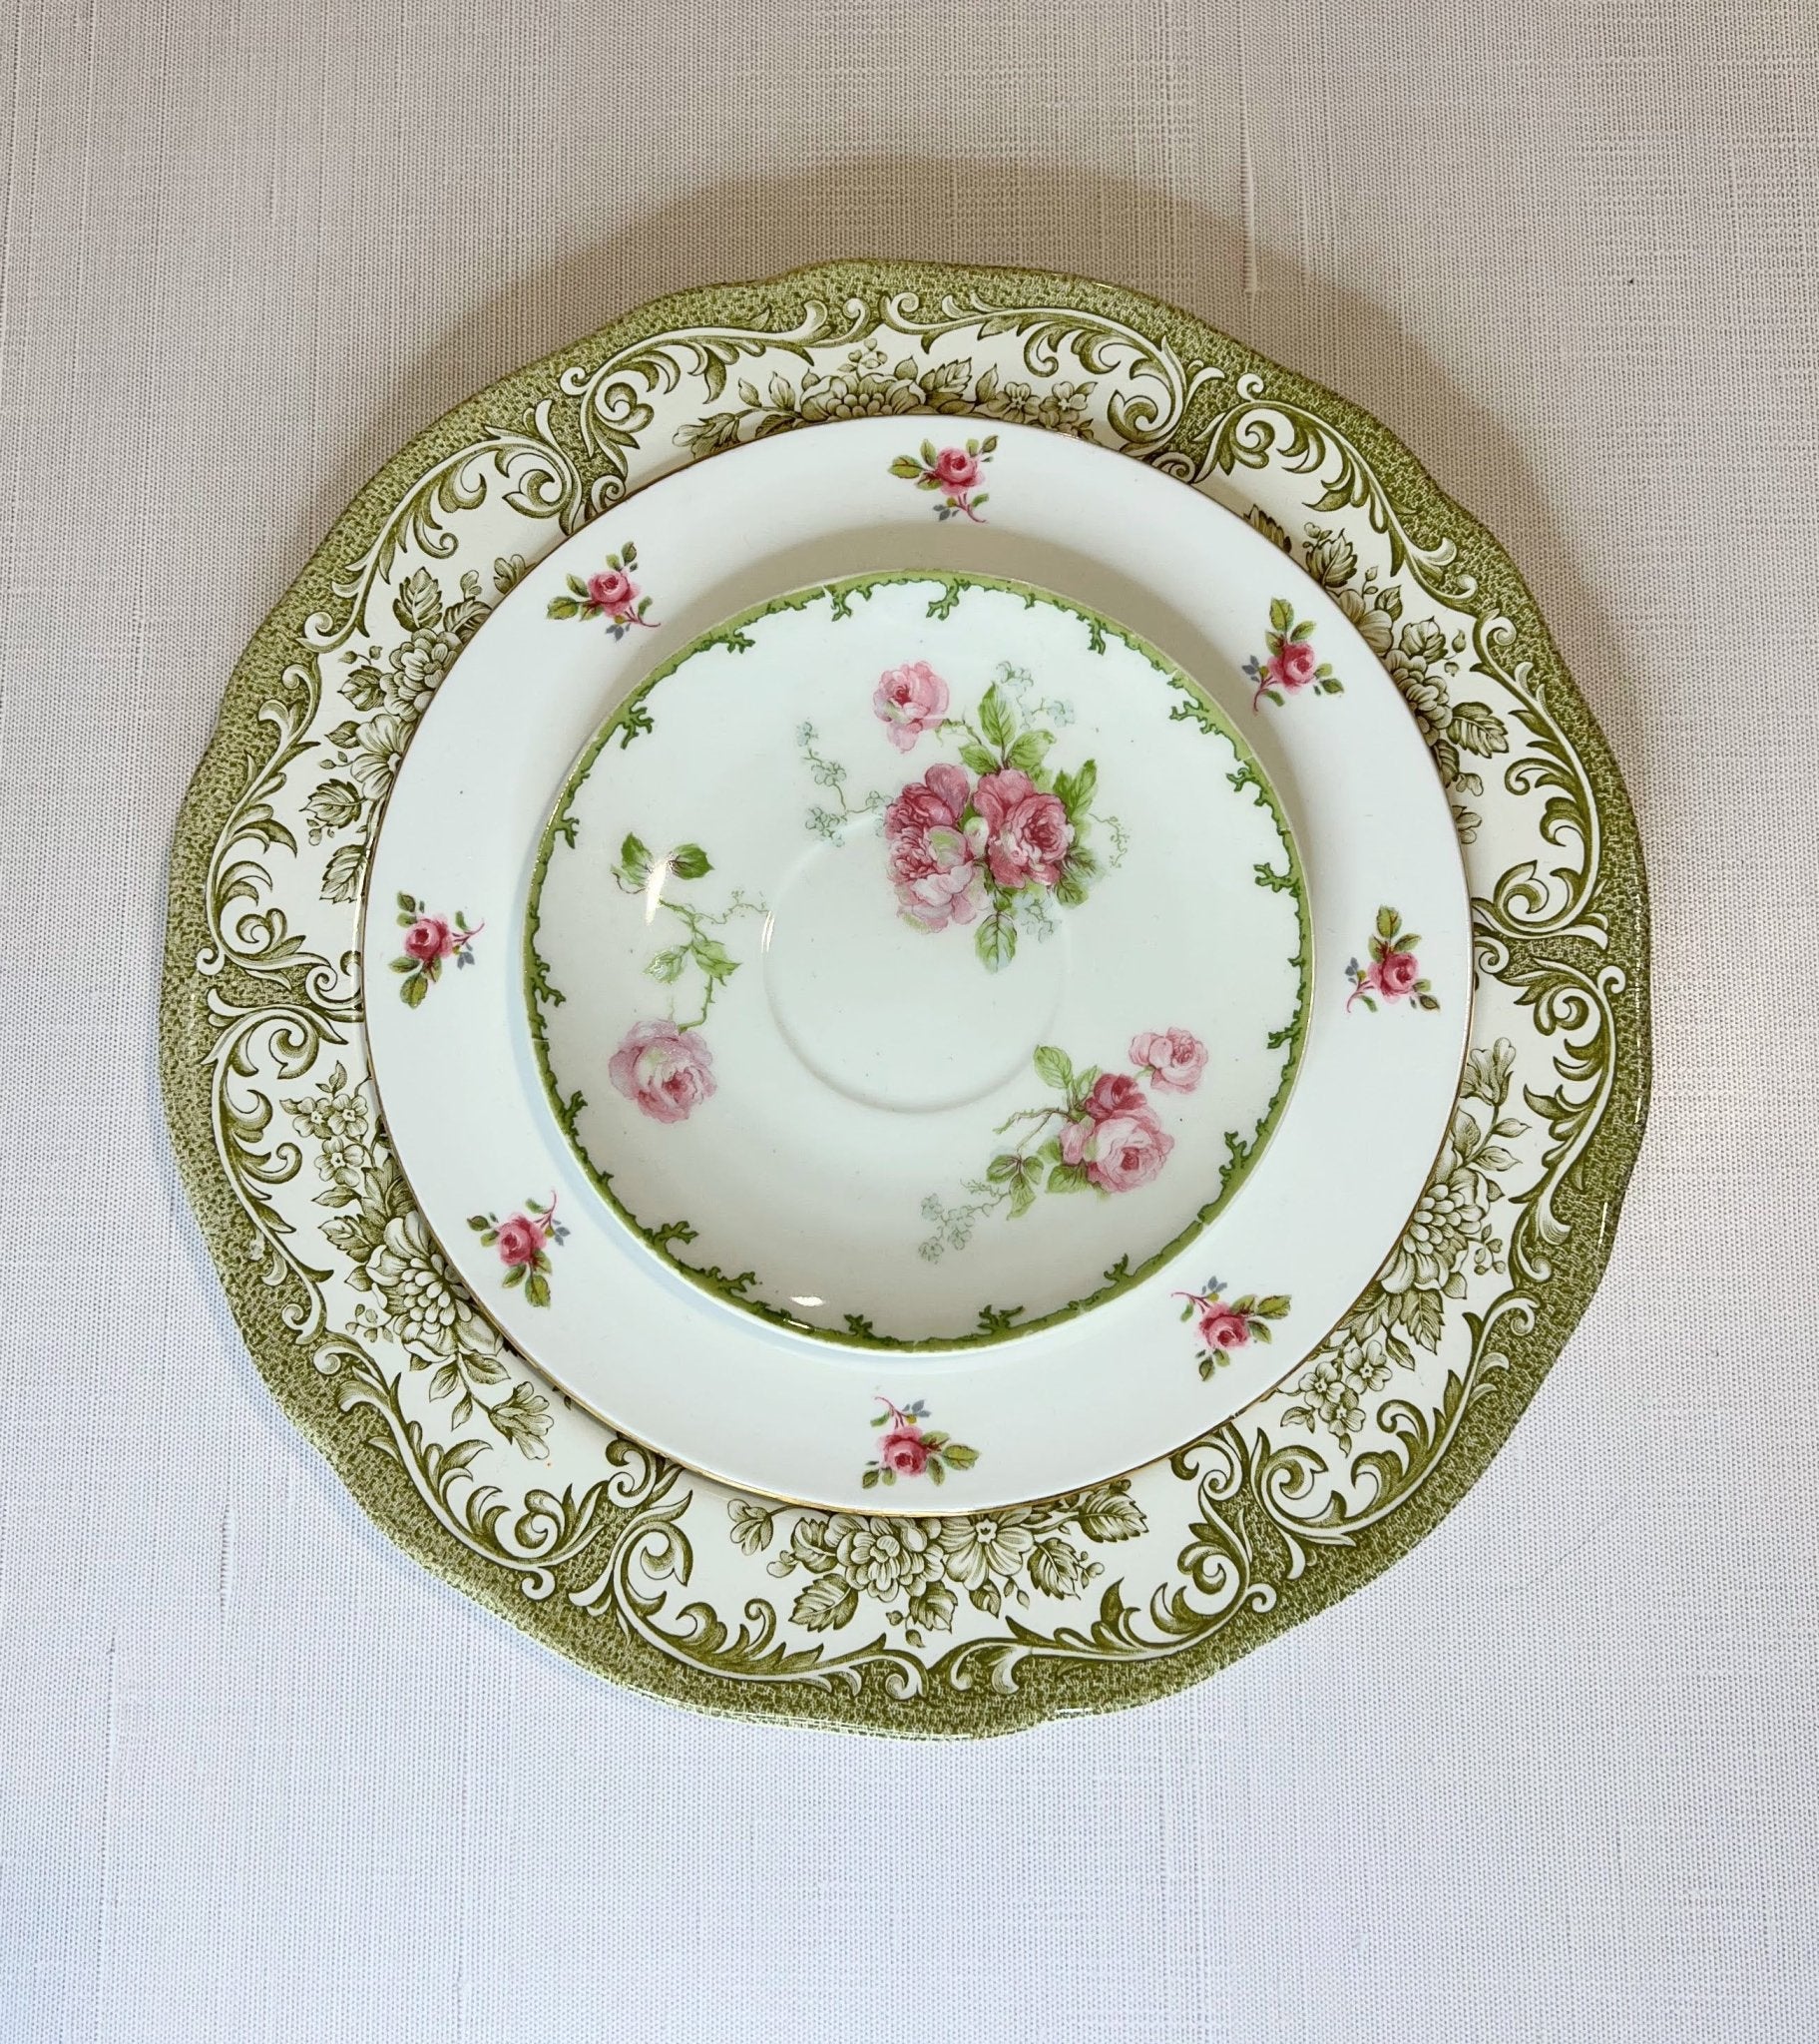 Tray of the Day - Tuesday | The Brooklyn Teacup - The Brooklyn Teacup